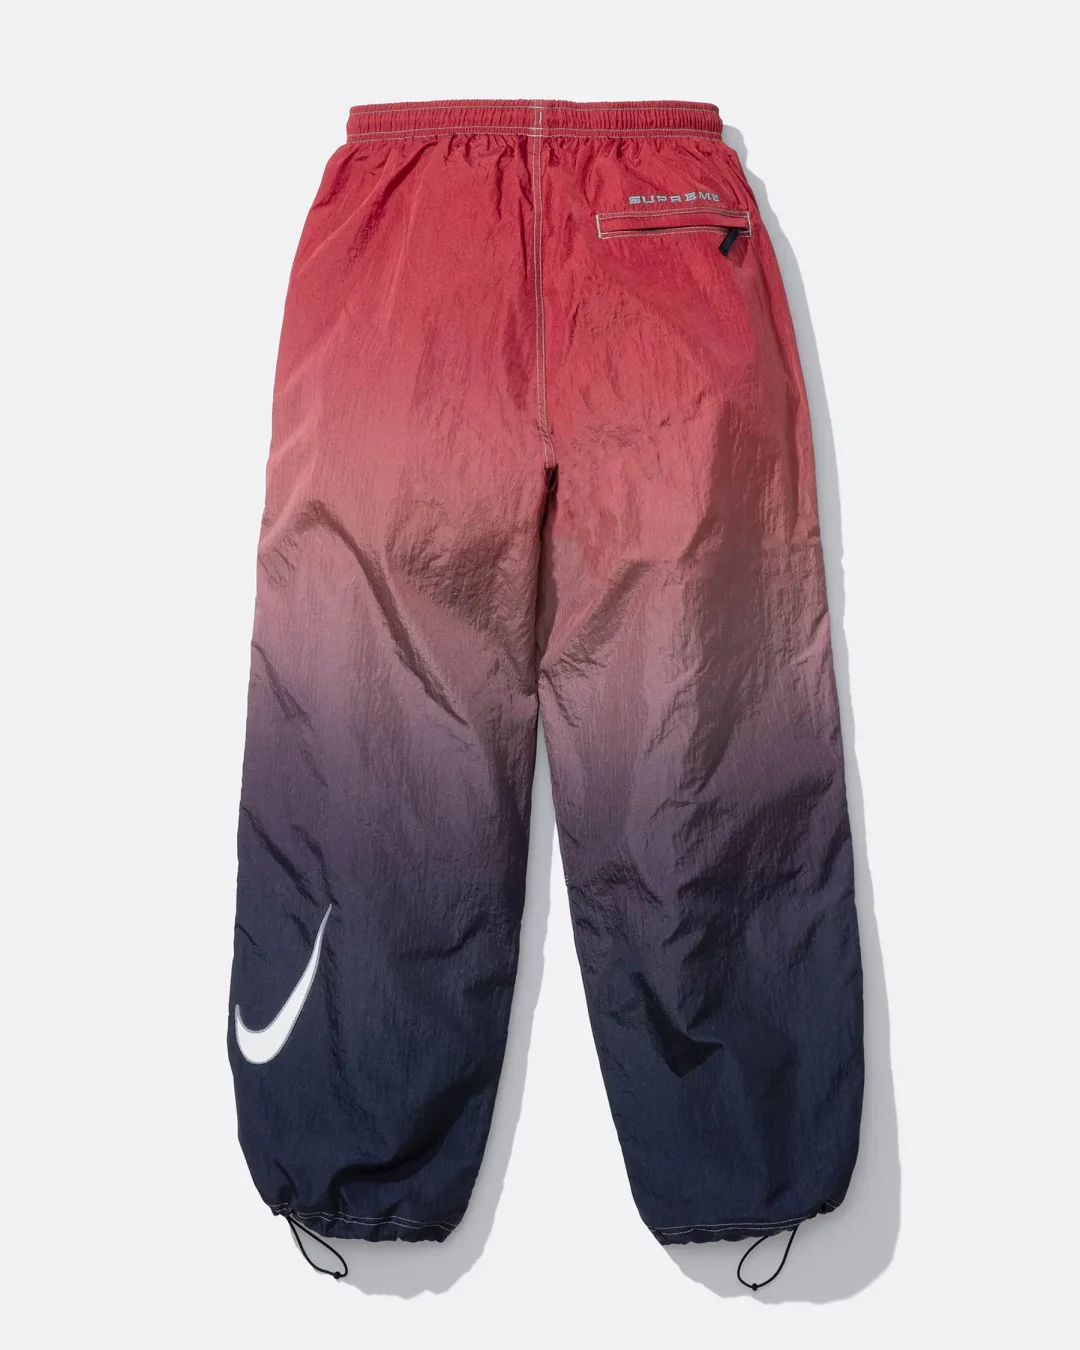 supreme-nike-24ss-collaboration-apparel-release-20240420-week10